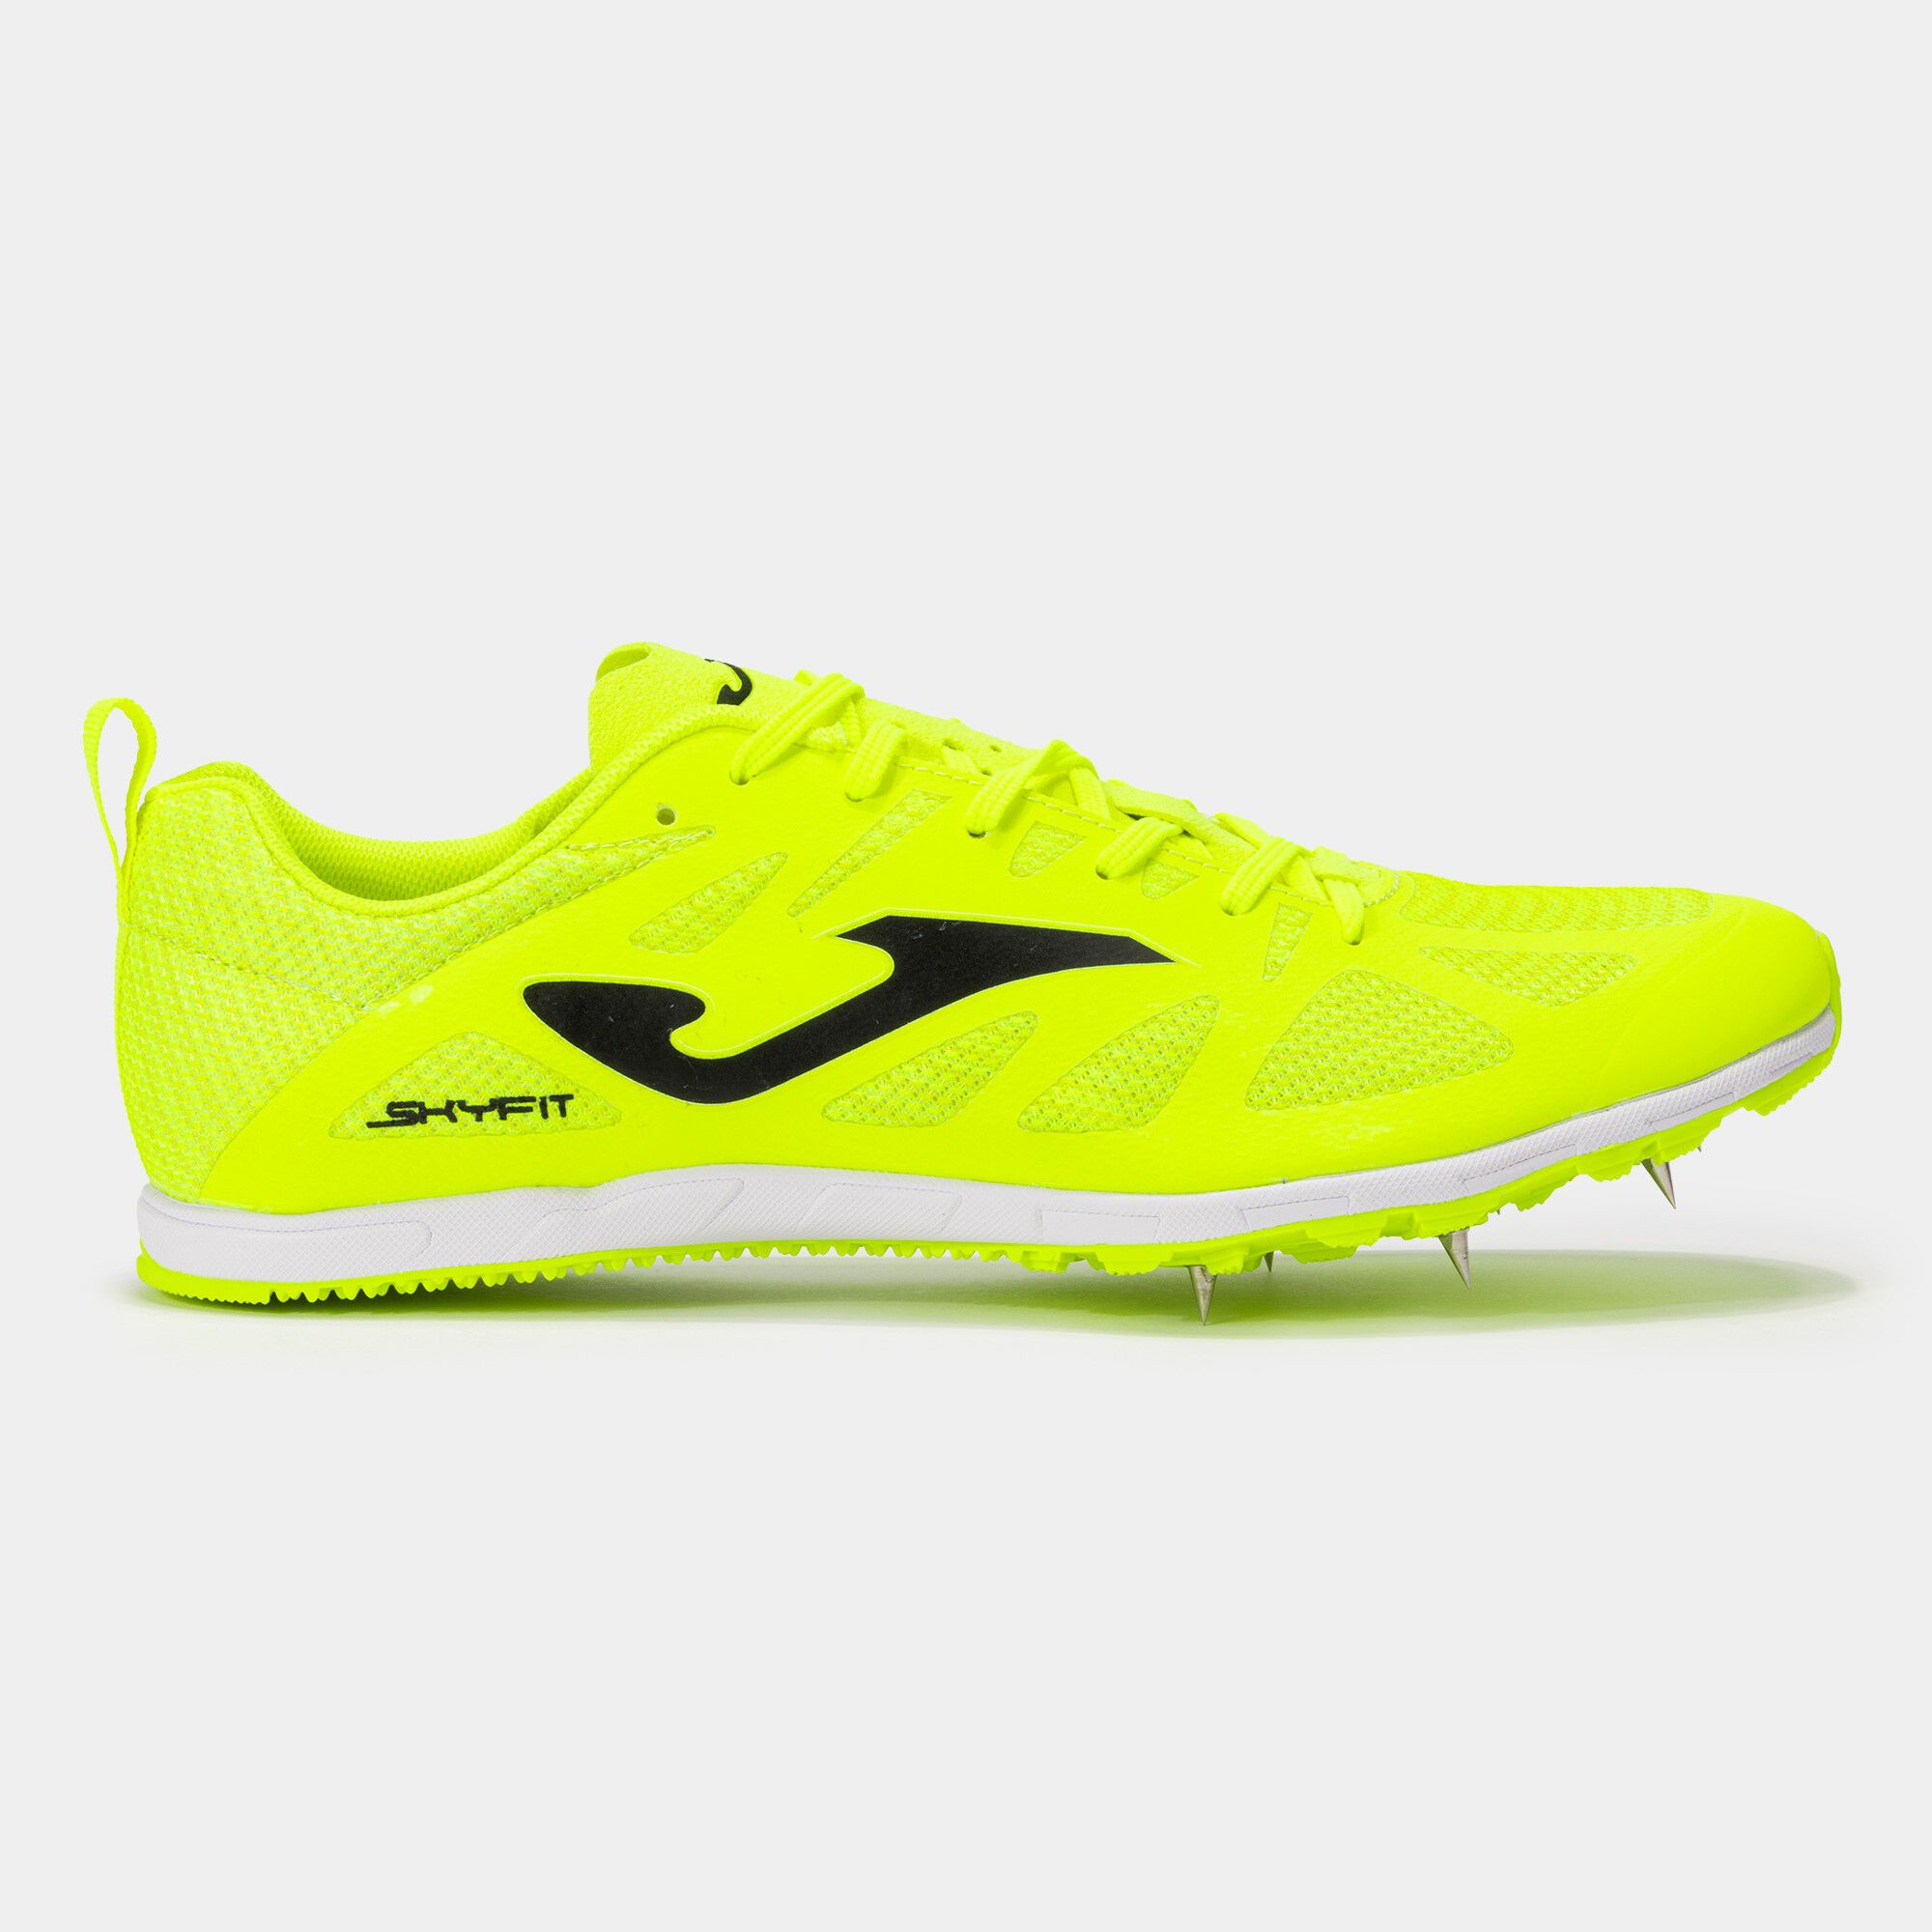 Running shoes Skyfit 22 claves man fluorescent yellow